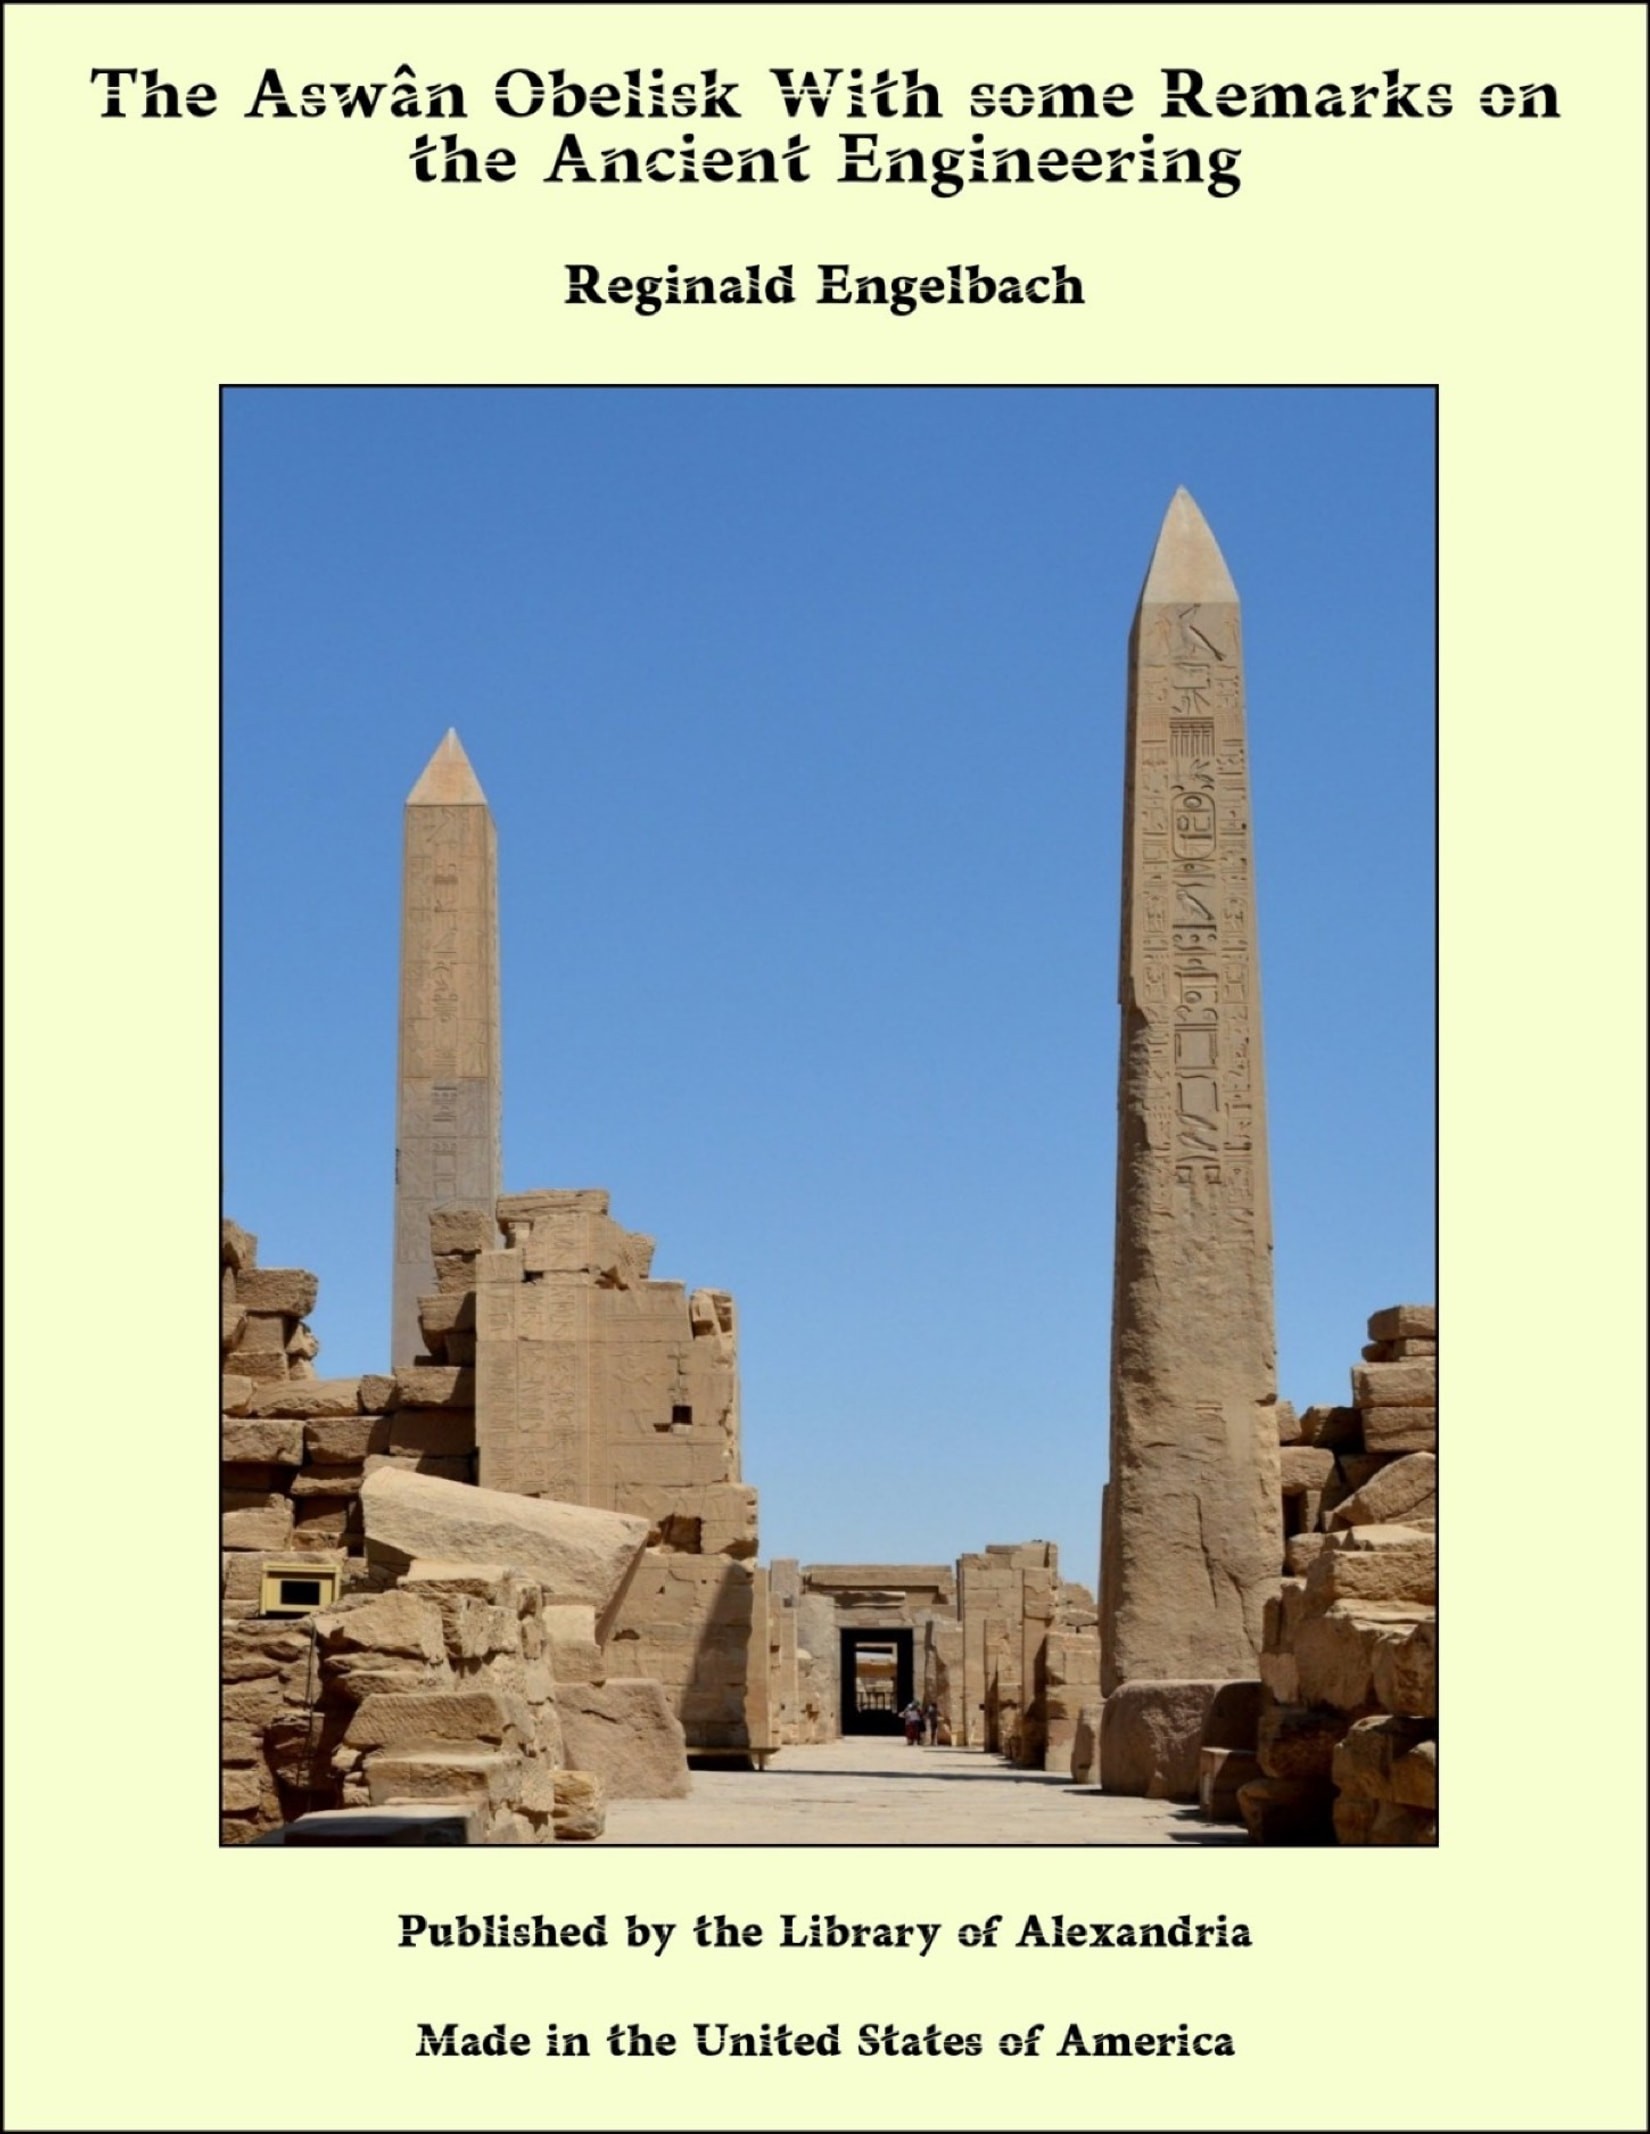 The problem of the obelisks, from a study of the unfinished obelisk at Aswan